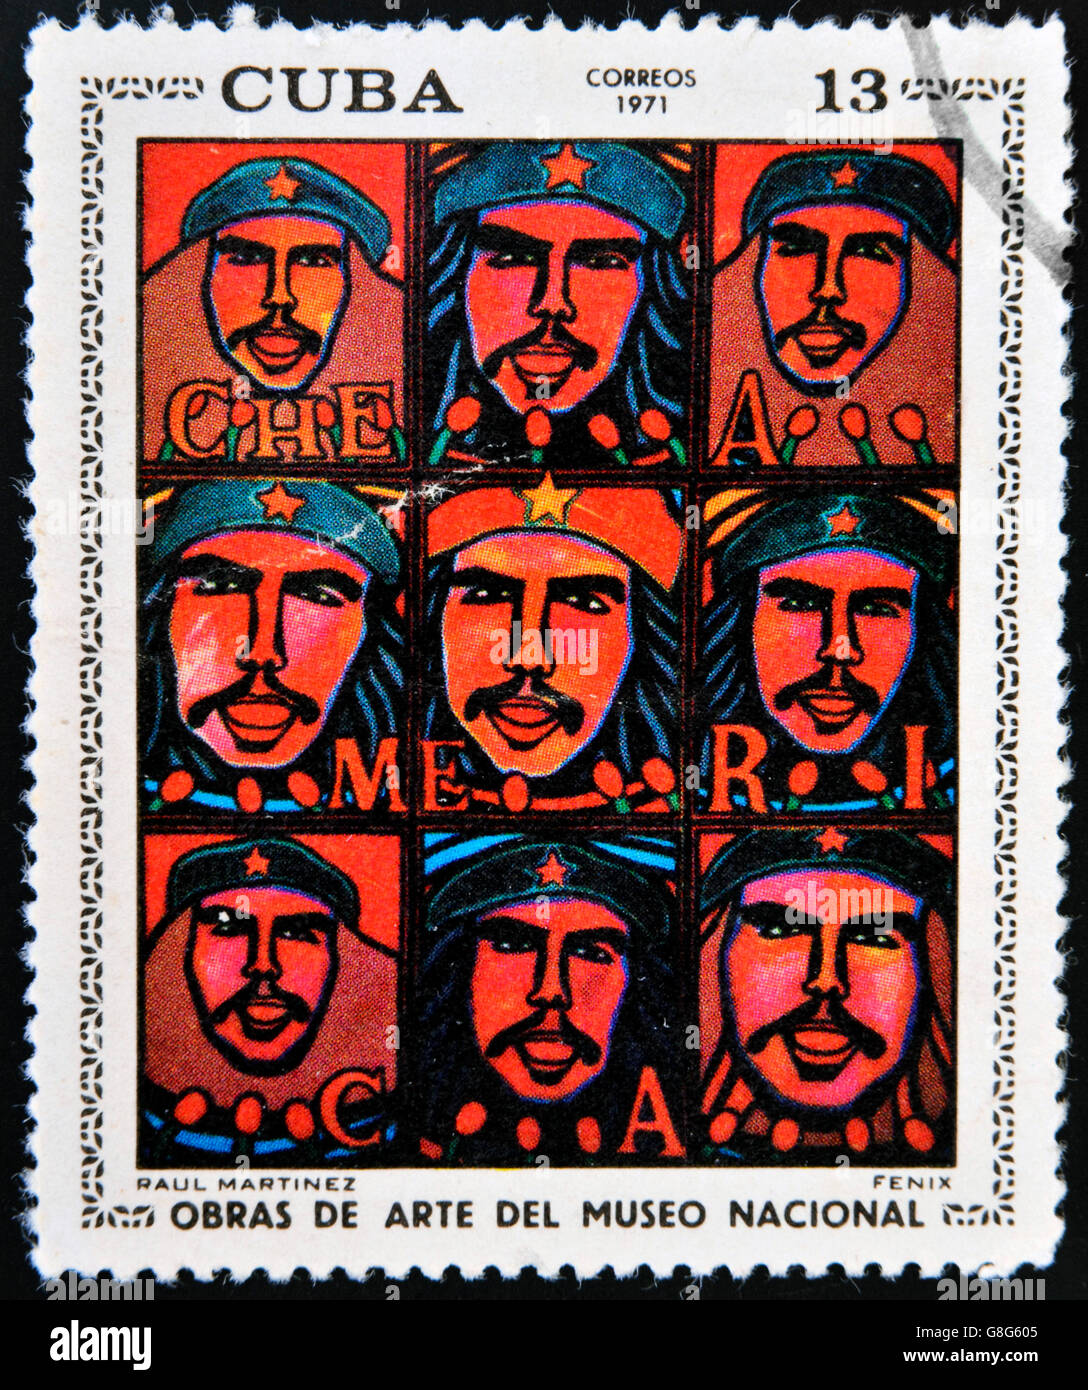 CUBA - CIRCA 1971: A stamp printed in cuba dedicated to works of art from the National Museum, shows 'Phoenix' by Raul Martinez, Stock Photo